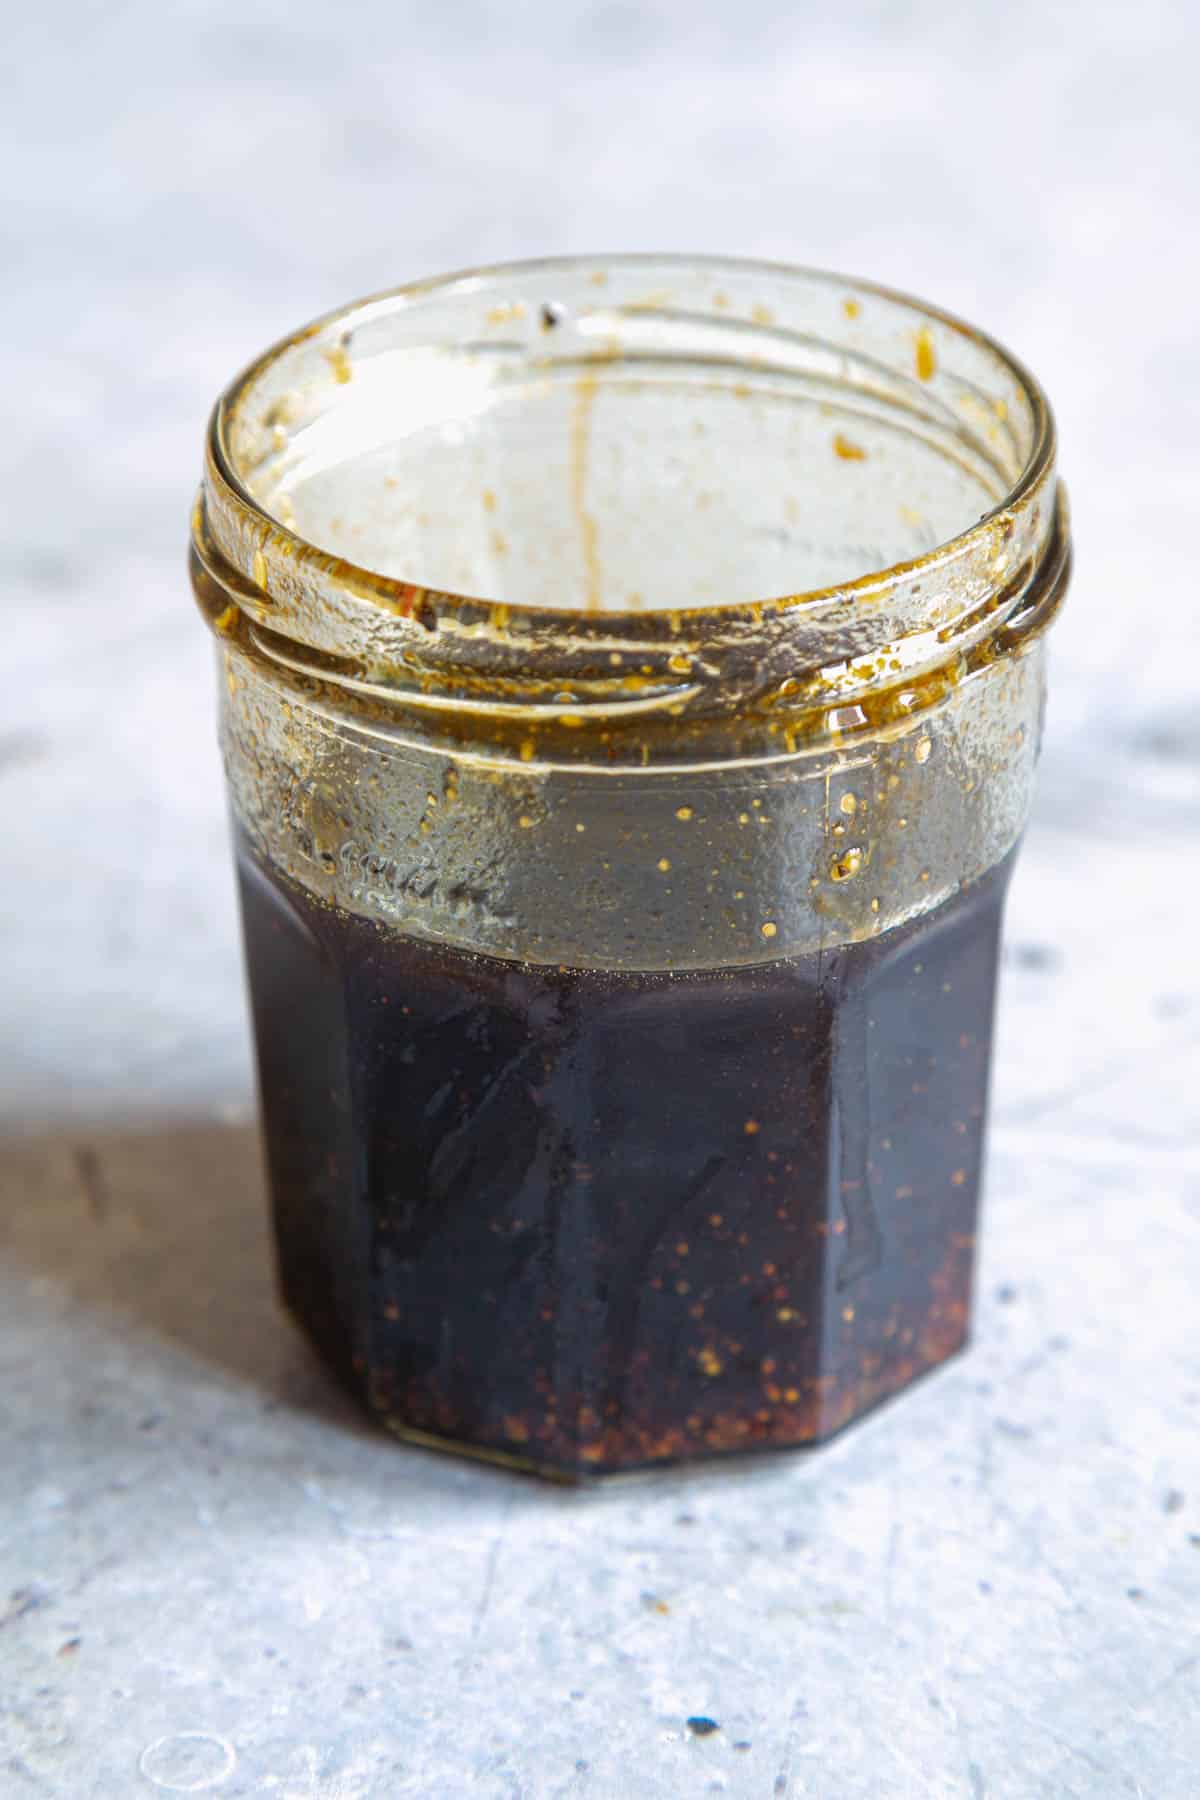 Once shaken, the dressing is emulsified and dark brown in colour.